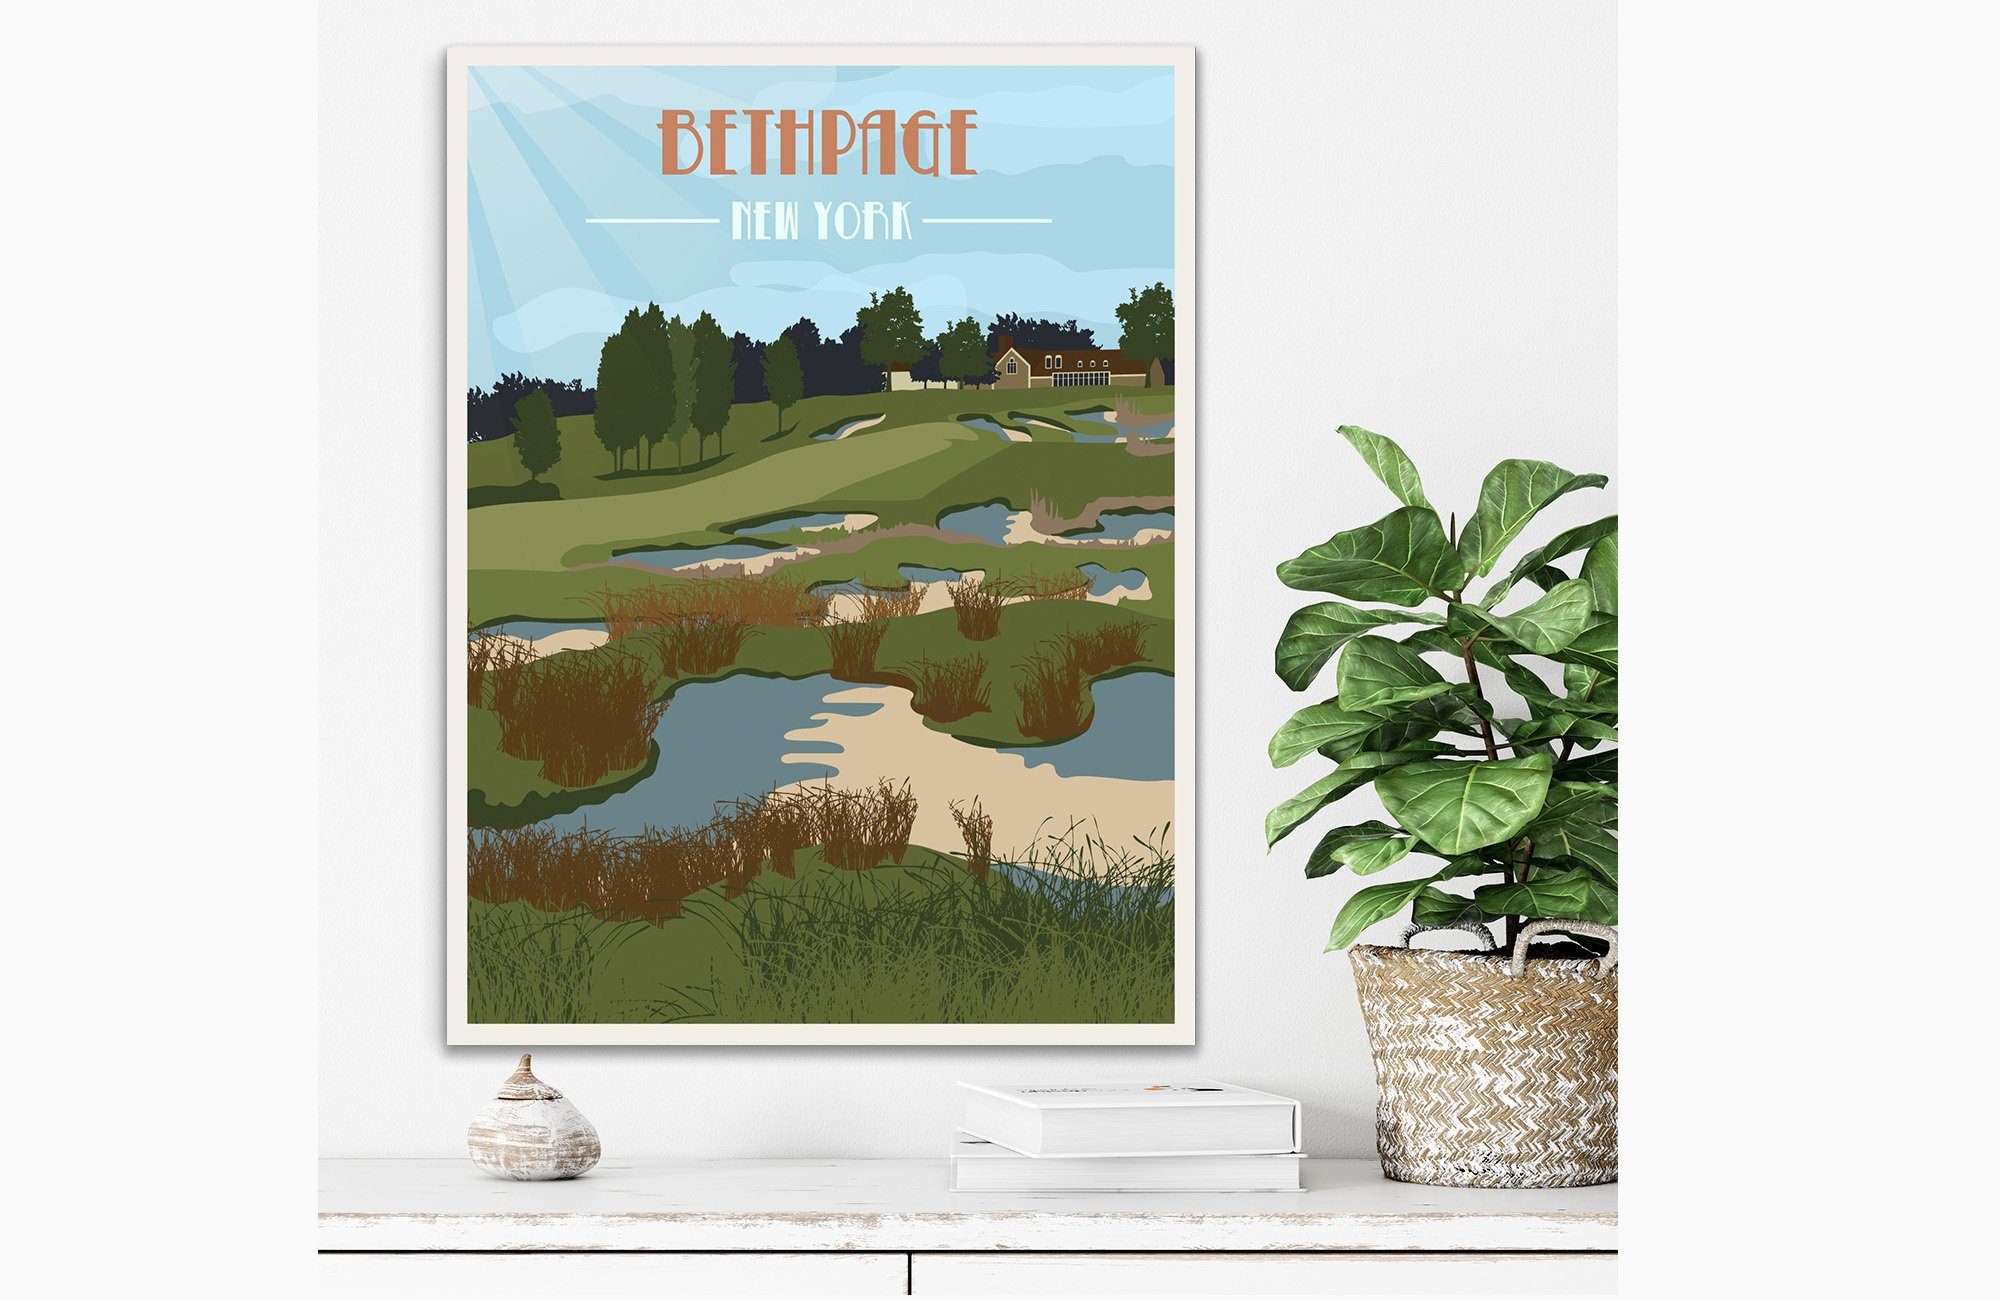 Bethpage Golf Club Poster, Poster, New York, Golf Clubs of America, Unframed Map World Vibe Studio 